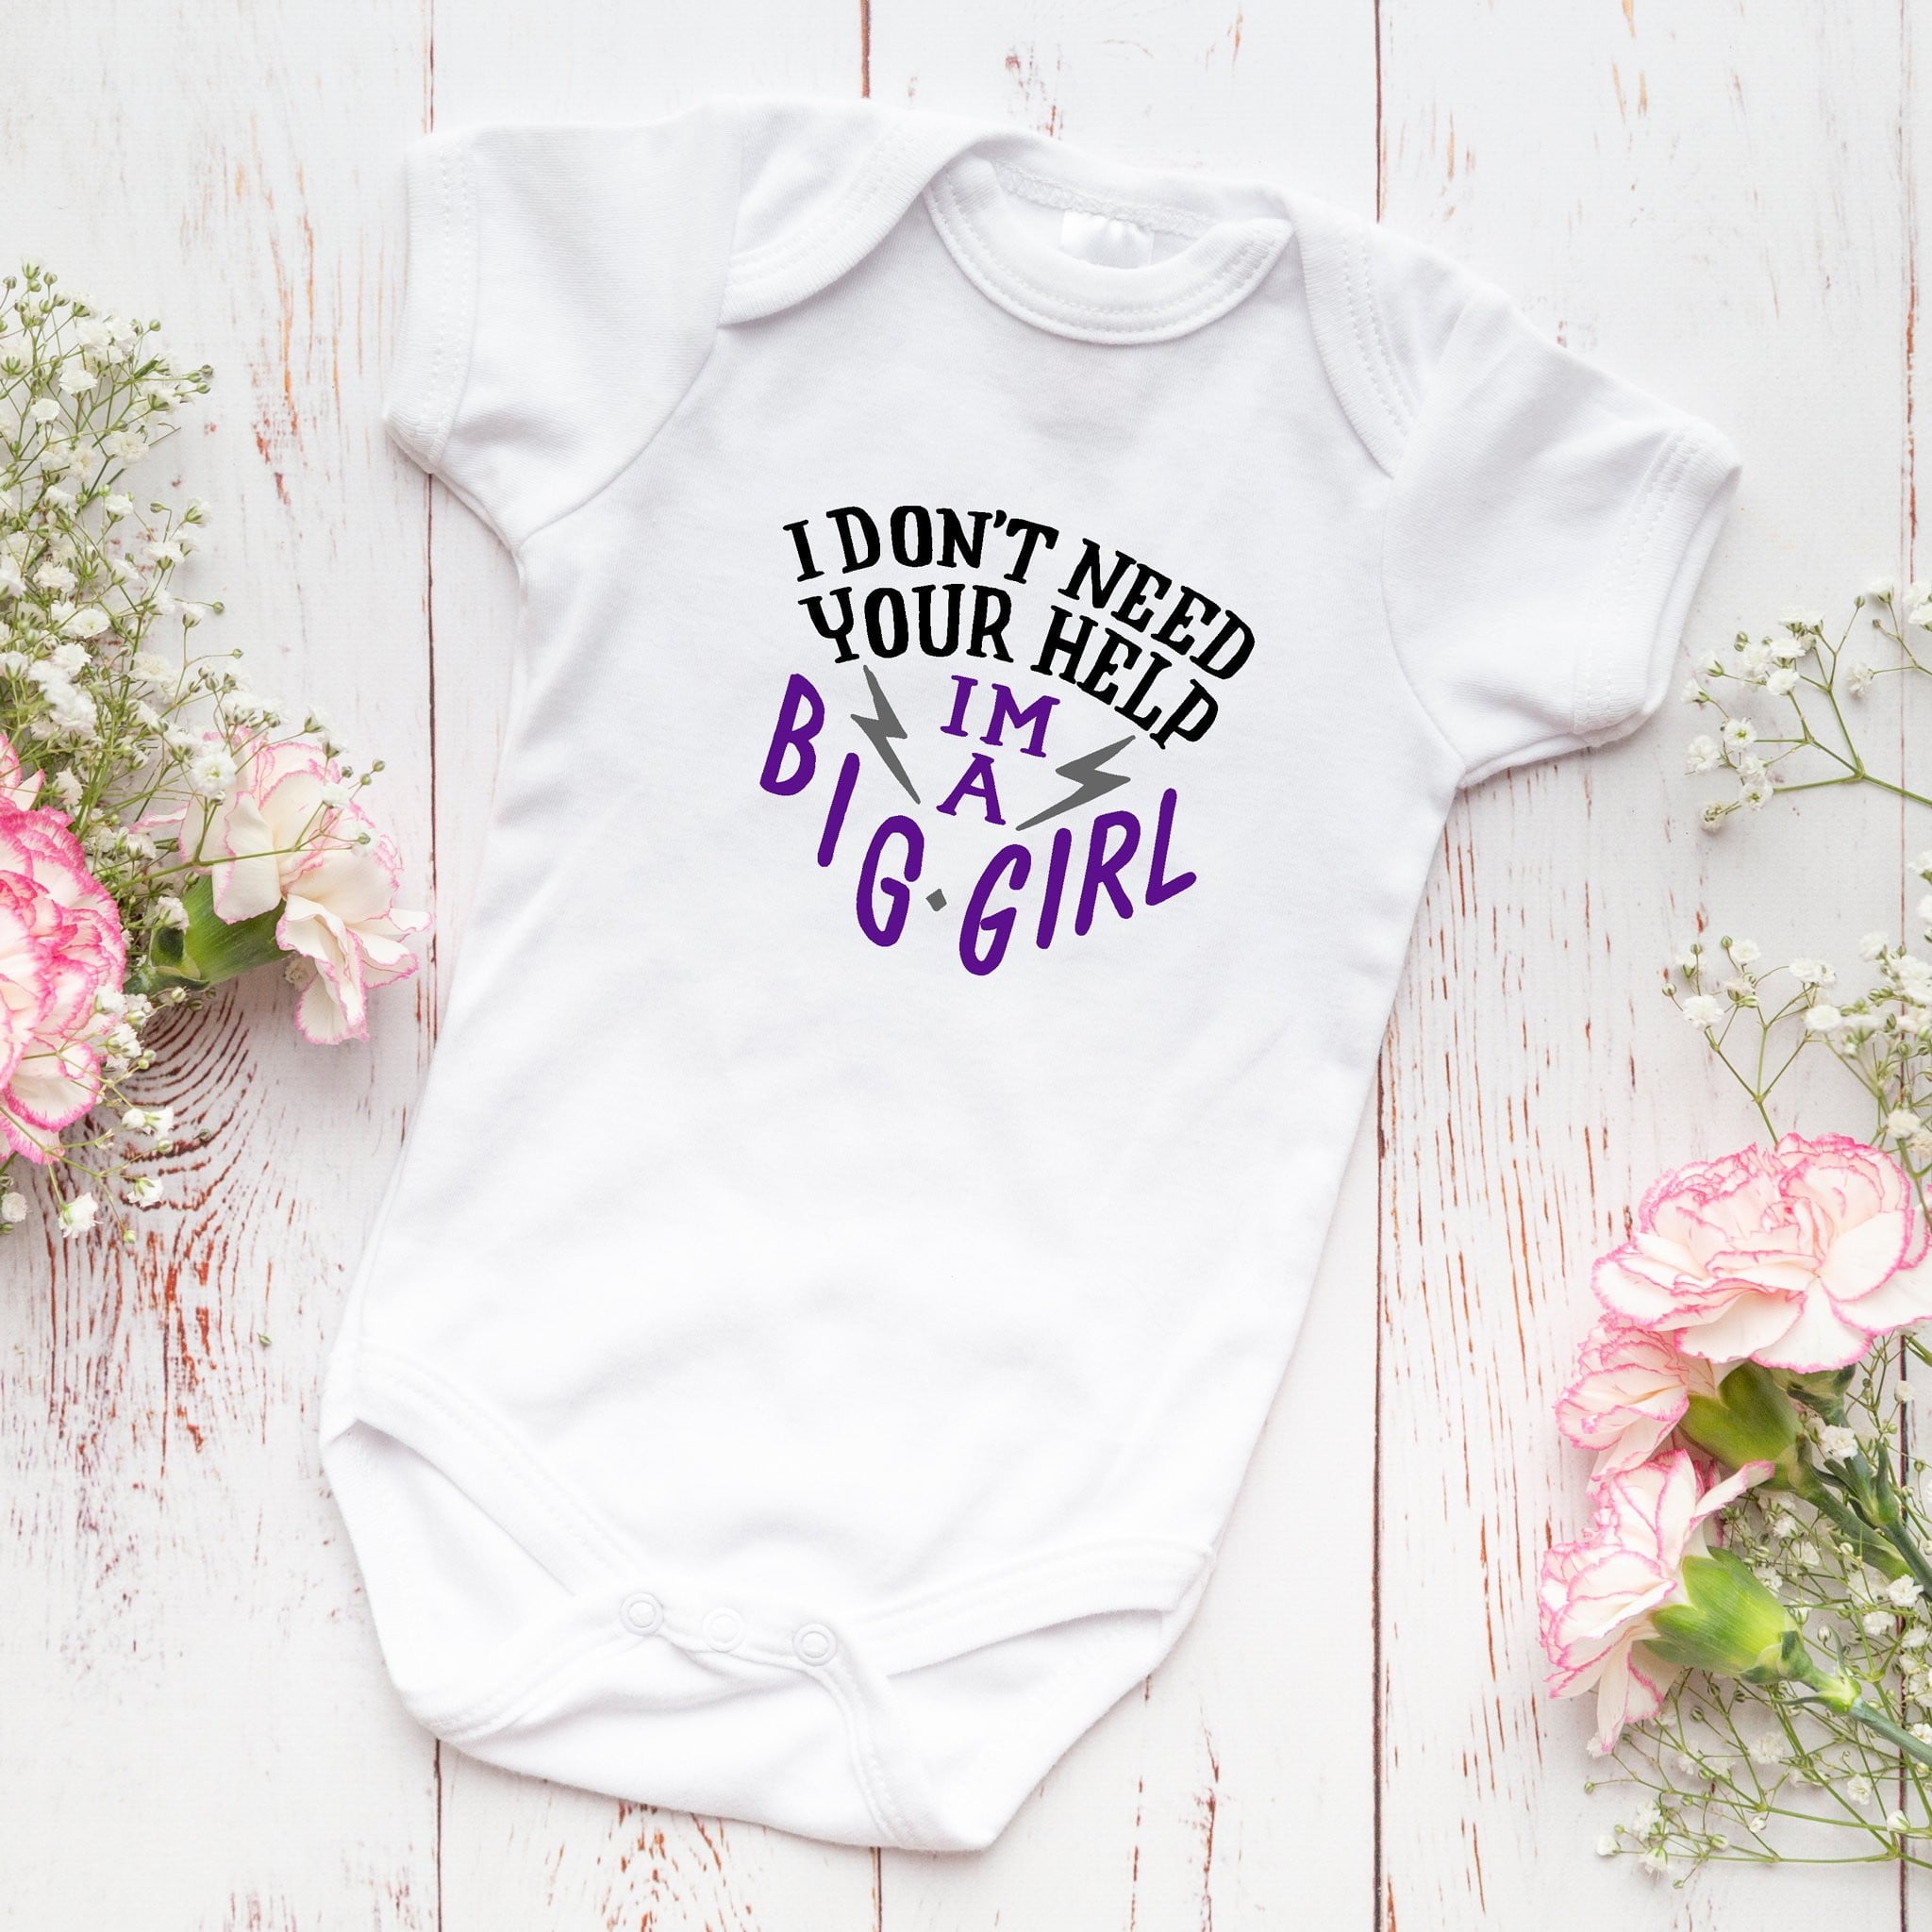 I Don't Need Your Help, I'm A Big Girl Onesie - Wayne Anthony